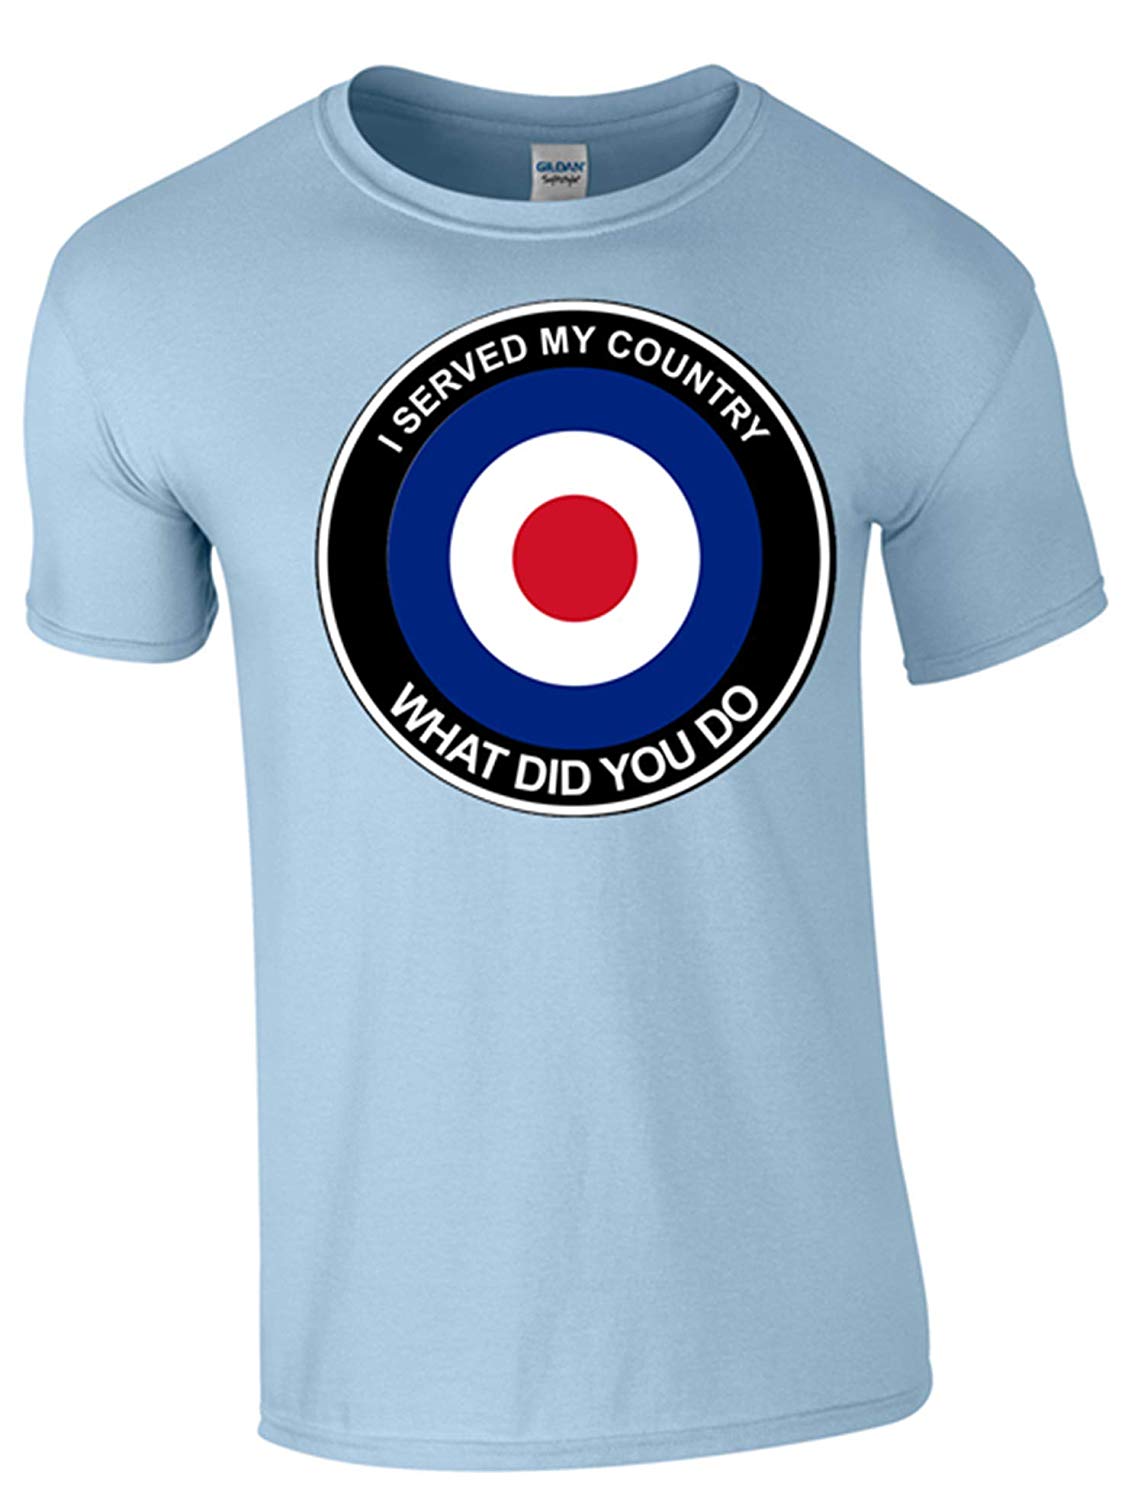 RAF What Did You do T-Shirt - Army 1157 Kit  Veterans Owned Business